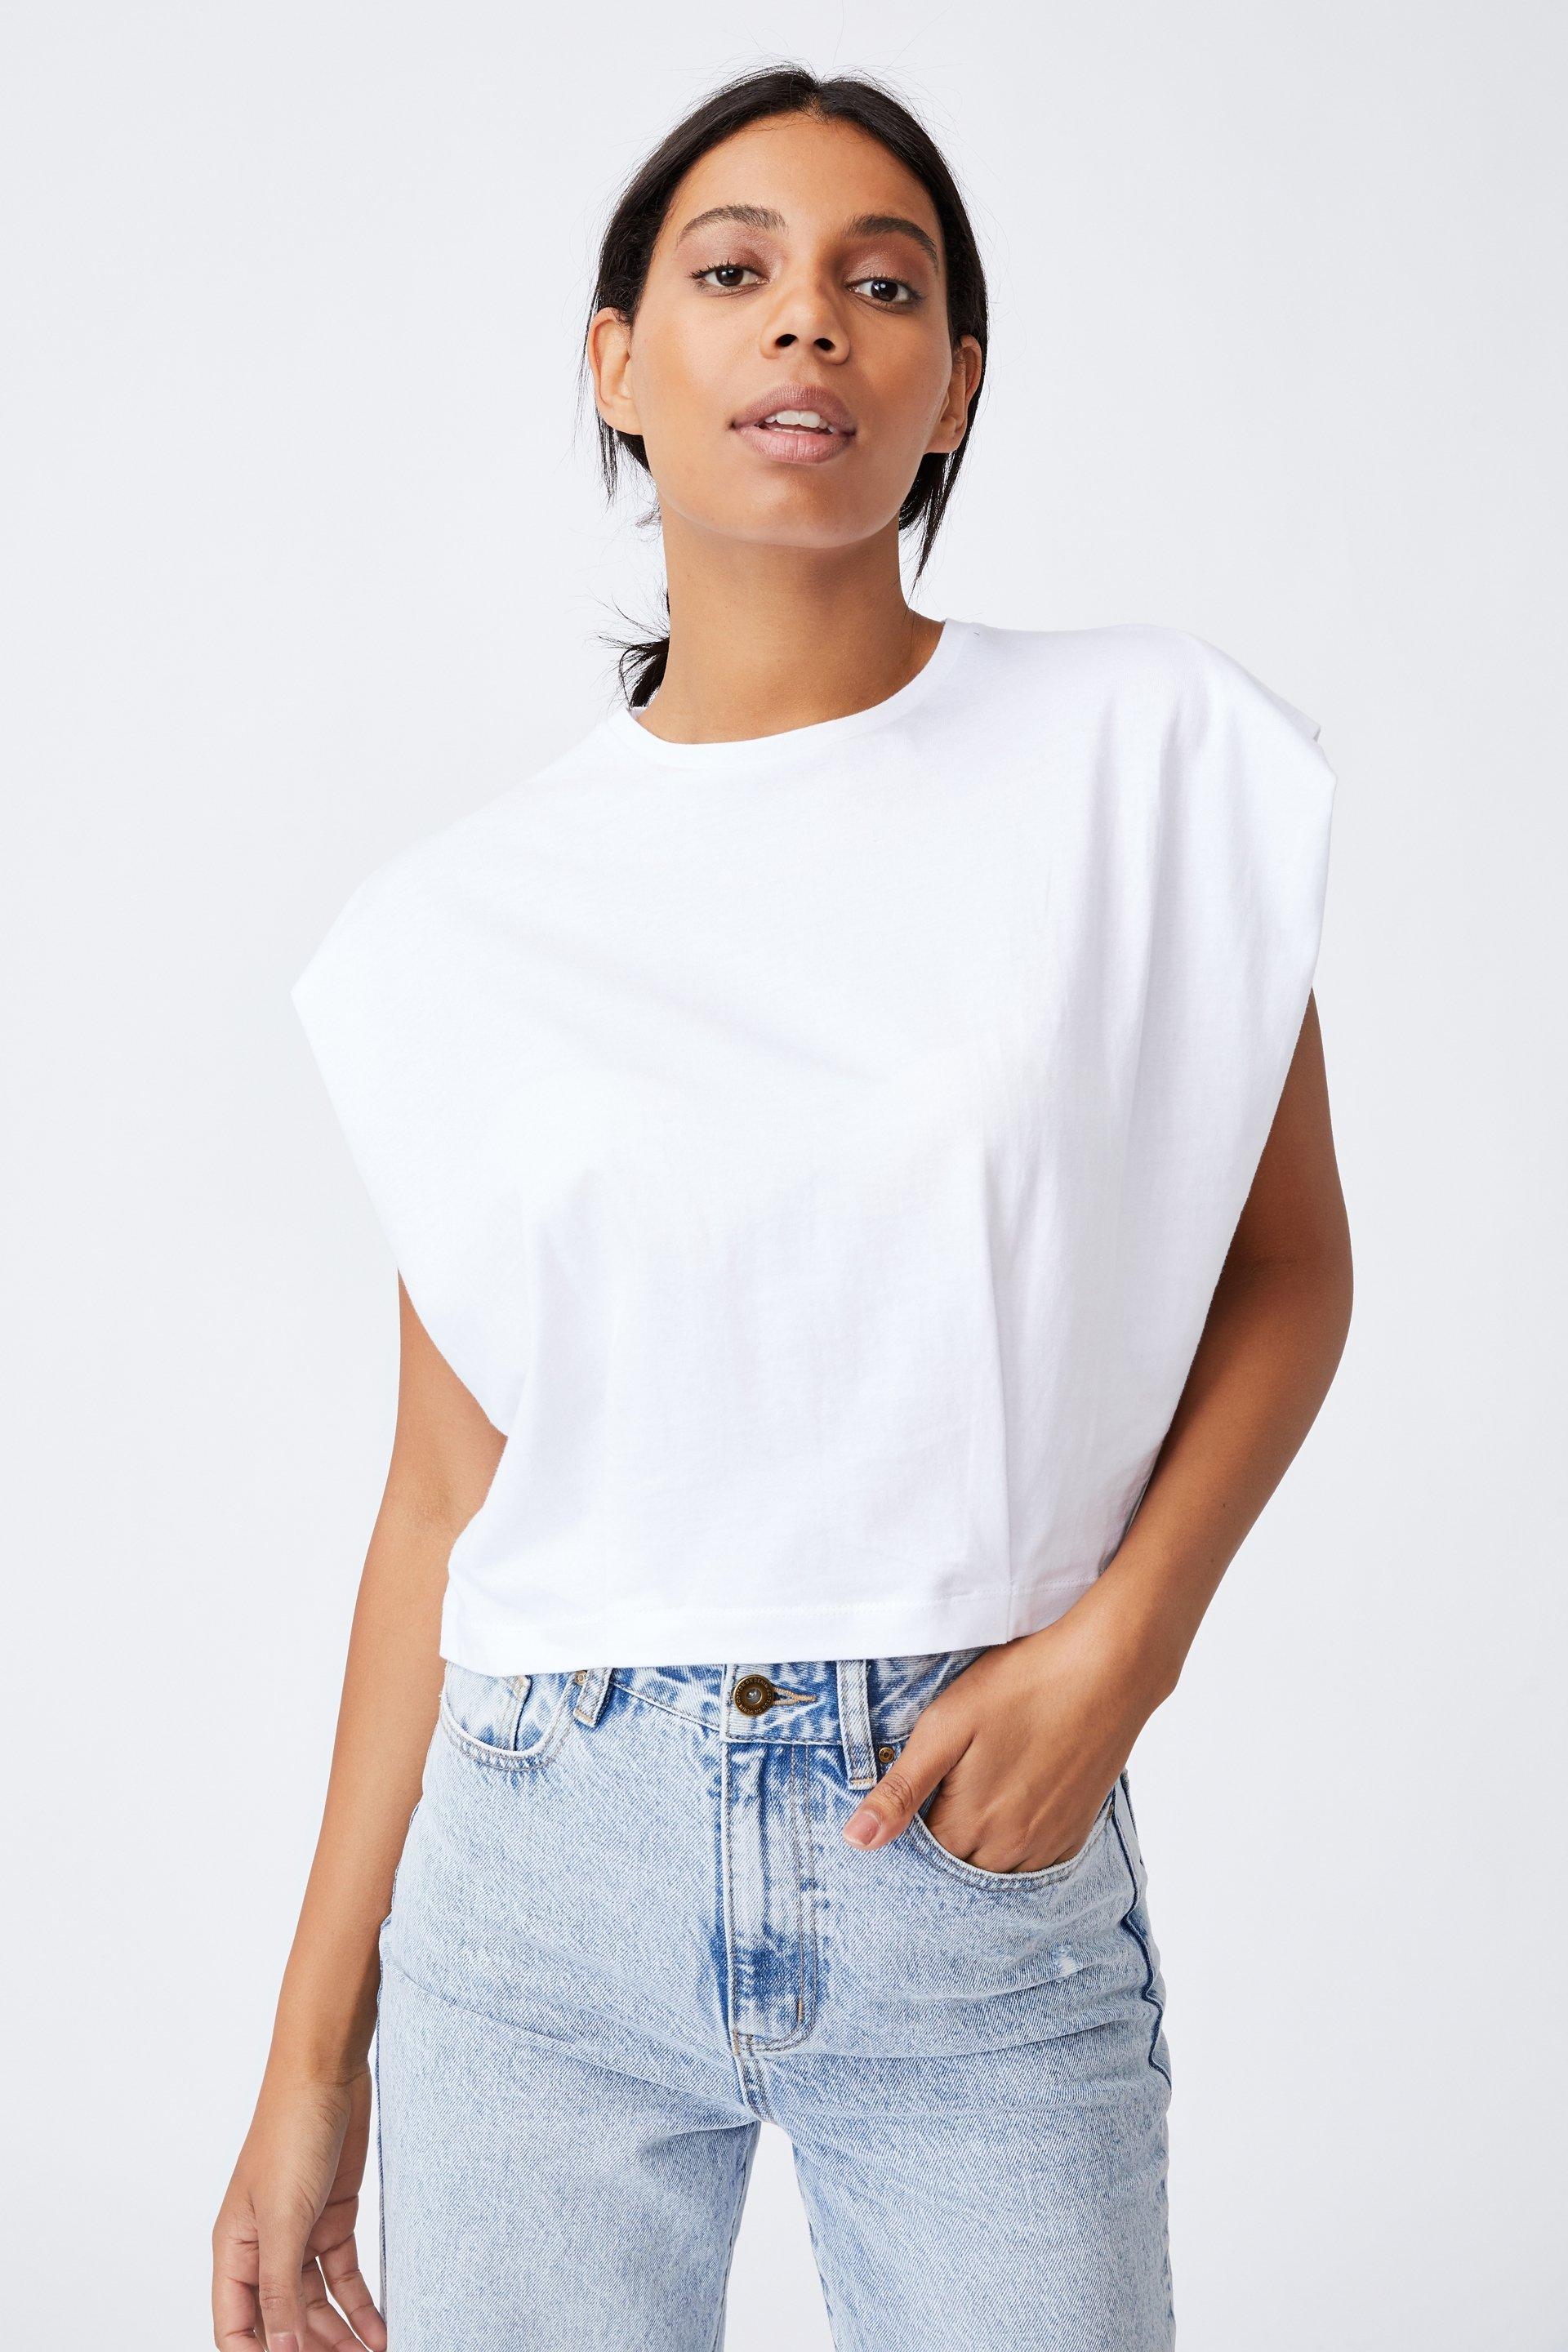 Form Focus Shoulder Tank White Cotton On T Shirts Vests And Camis